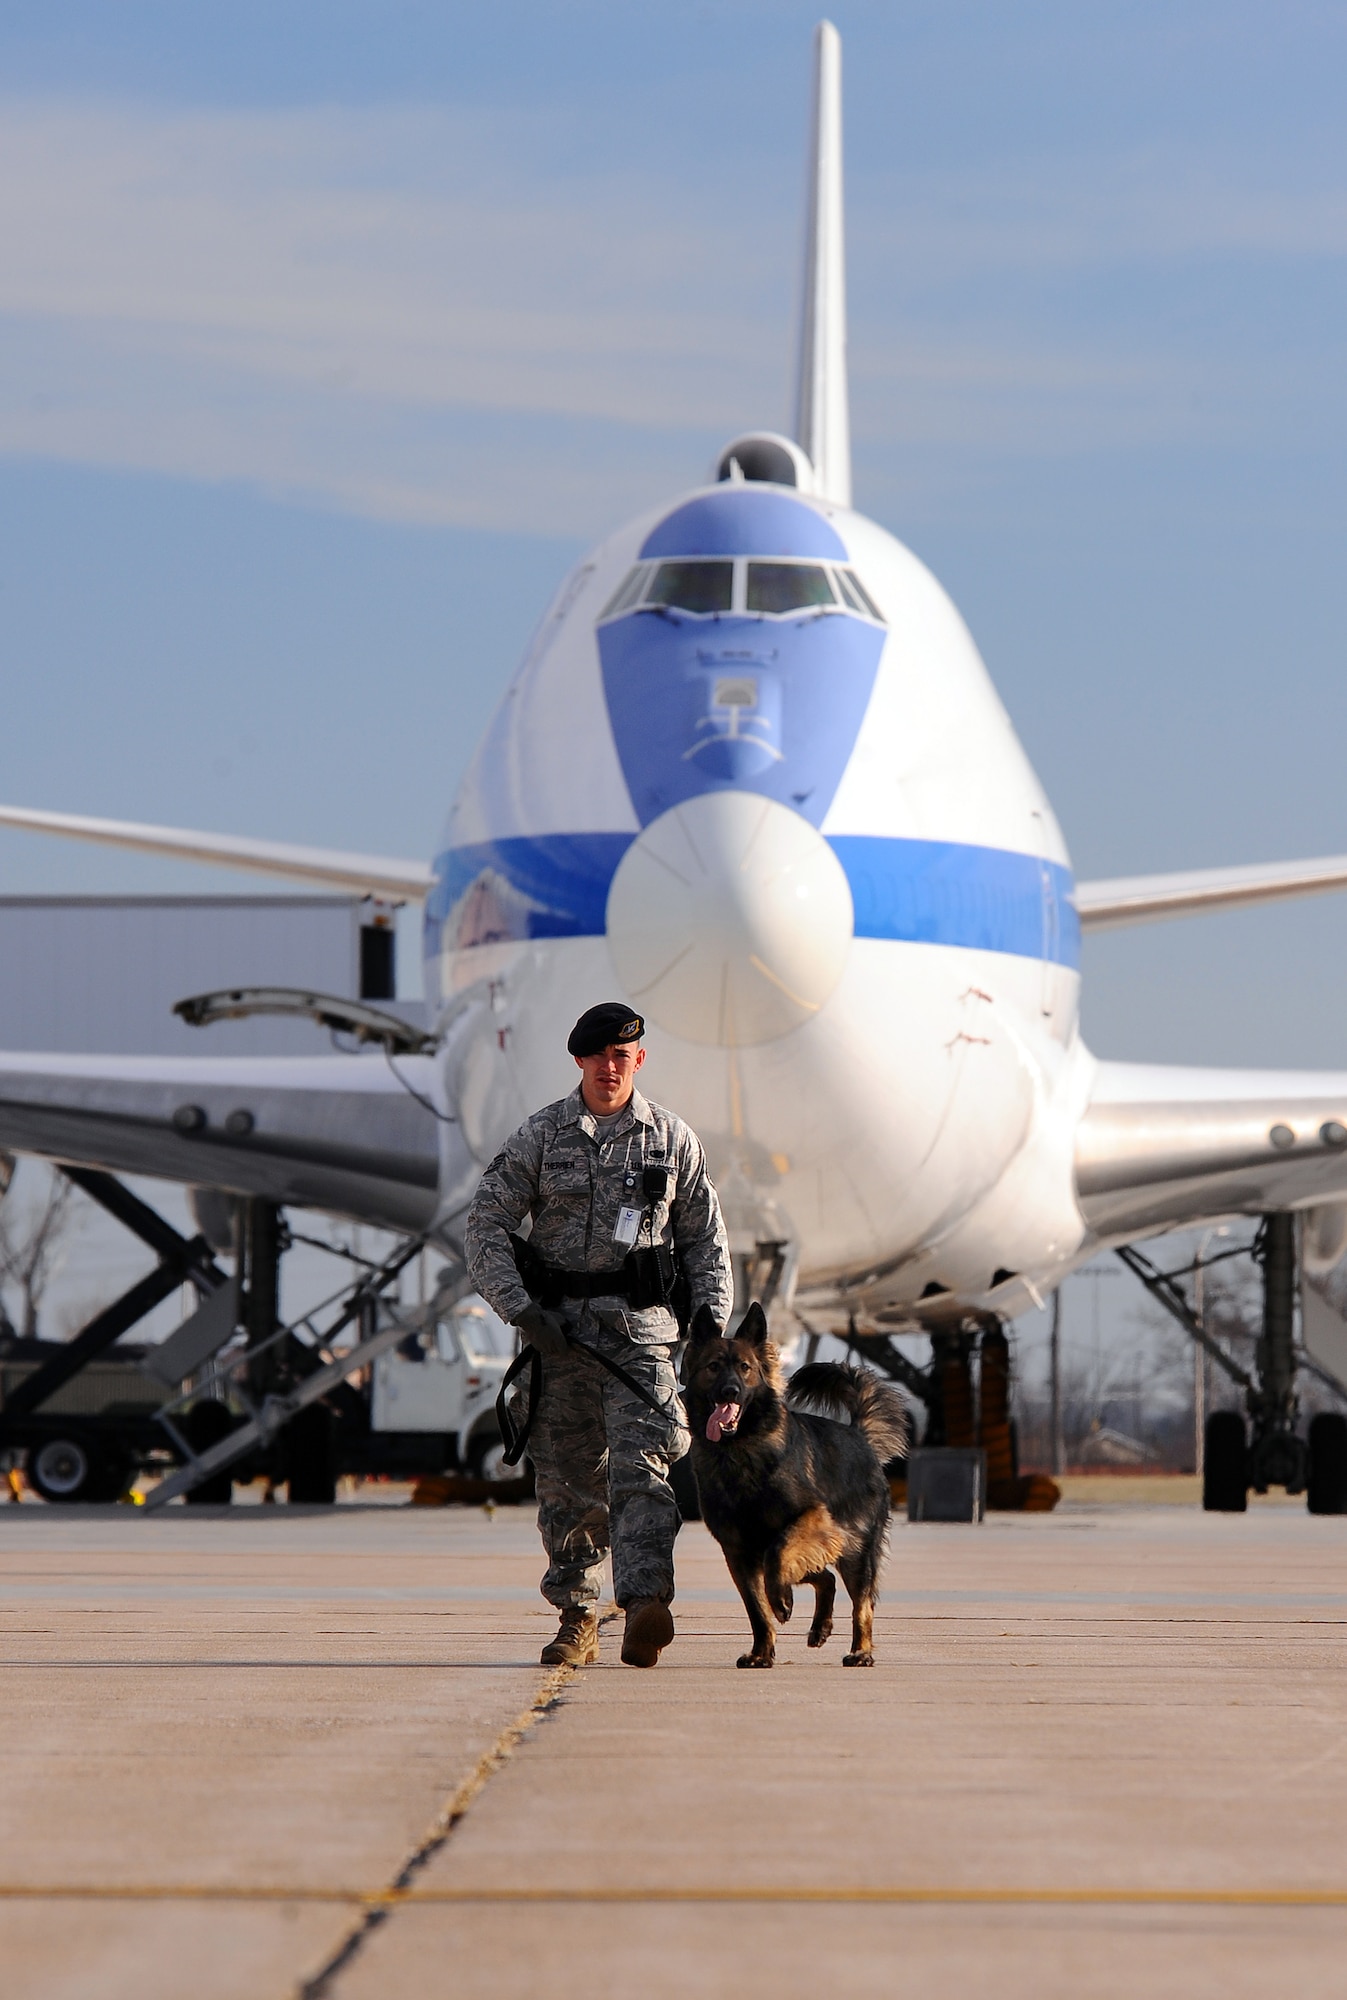 OFFUTT AIR FORCE BASE, Neb. - Staff Sgt. Joel Therrien, a military working dog handler with the 55th Security Forces Squadron, walks down Offutt?s Bravo ramp while doing a routine sweep of the fence line with his dog Dasty, a Belgian Tervuren, Dec. 1.  Dasty is certified by trainers from Lackland AFB to sniff out explosives.  Military working dog teams have led explosive searches for such recent distinguished visitors as the Secretary of Defense, Vice President, First Lady and countless other base visitors and public events.  U.S. Air Force Photo by Josh Plueger (Released)